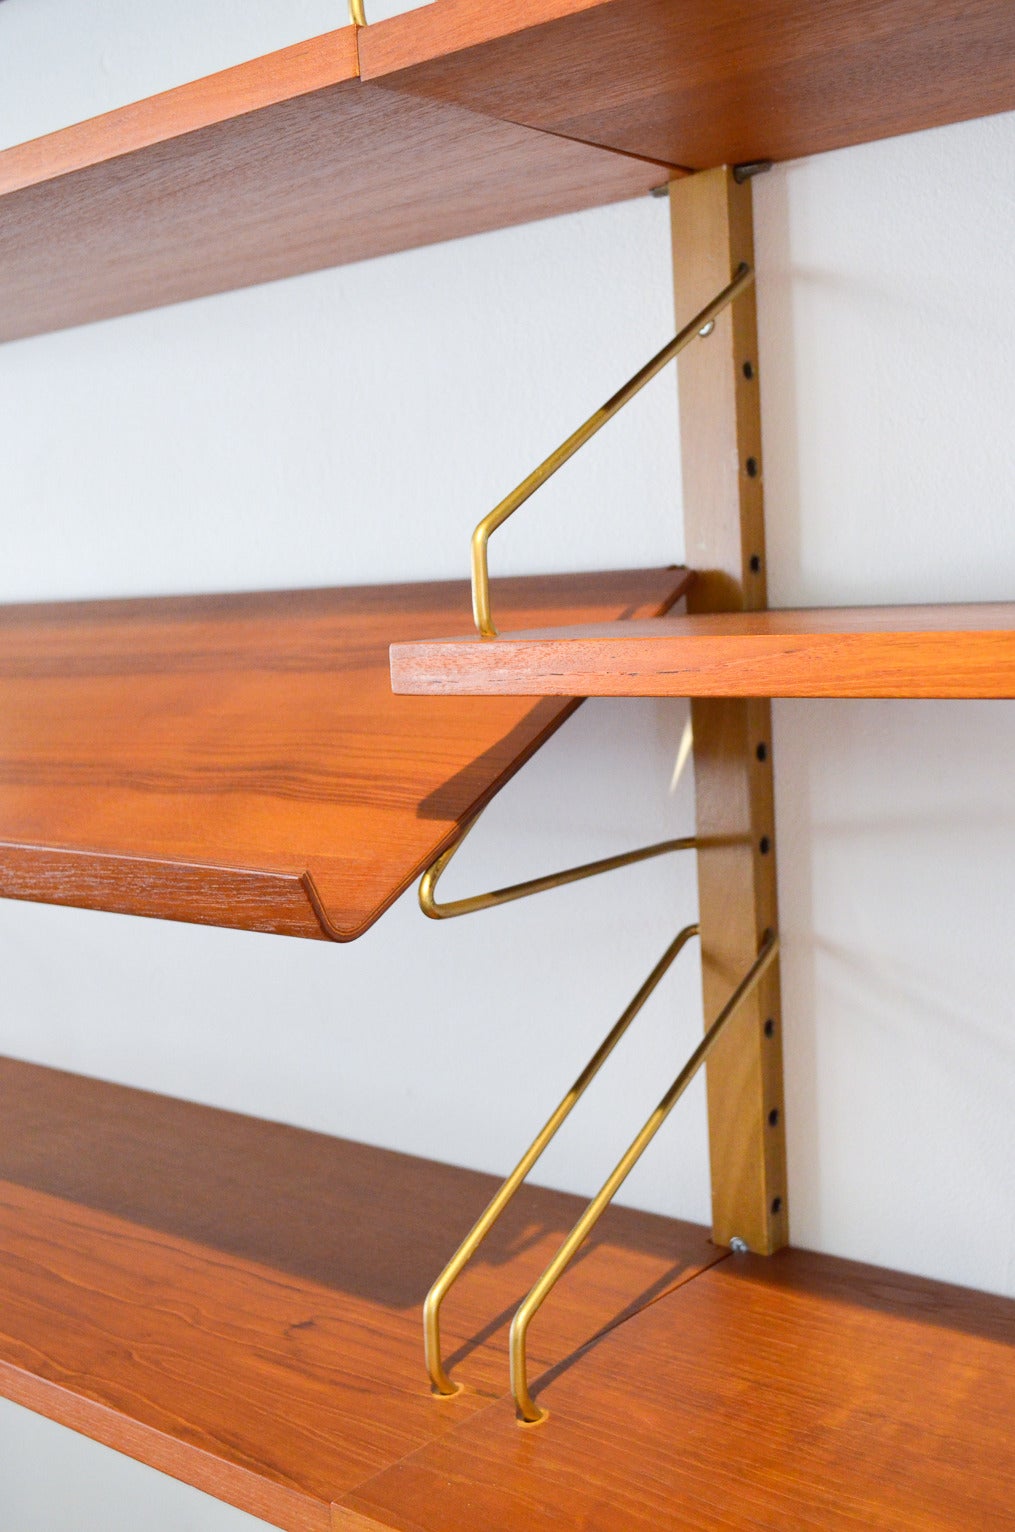 Original Danish modern Cado Royale teak shelving unit designed by Poul Cadovious. Fully modular and adjustable shelving, includes a rare magazine shelf. Excellent vintage condition, this piece easily attaches to any wall with just a few drywall